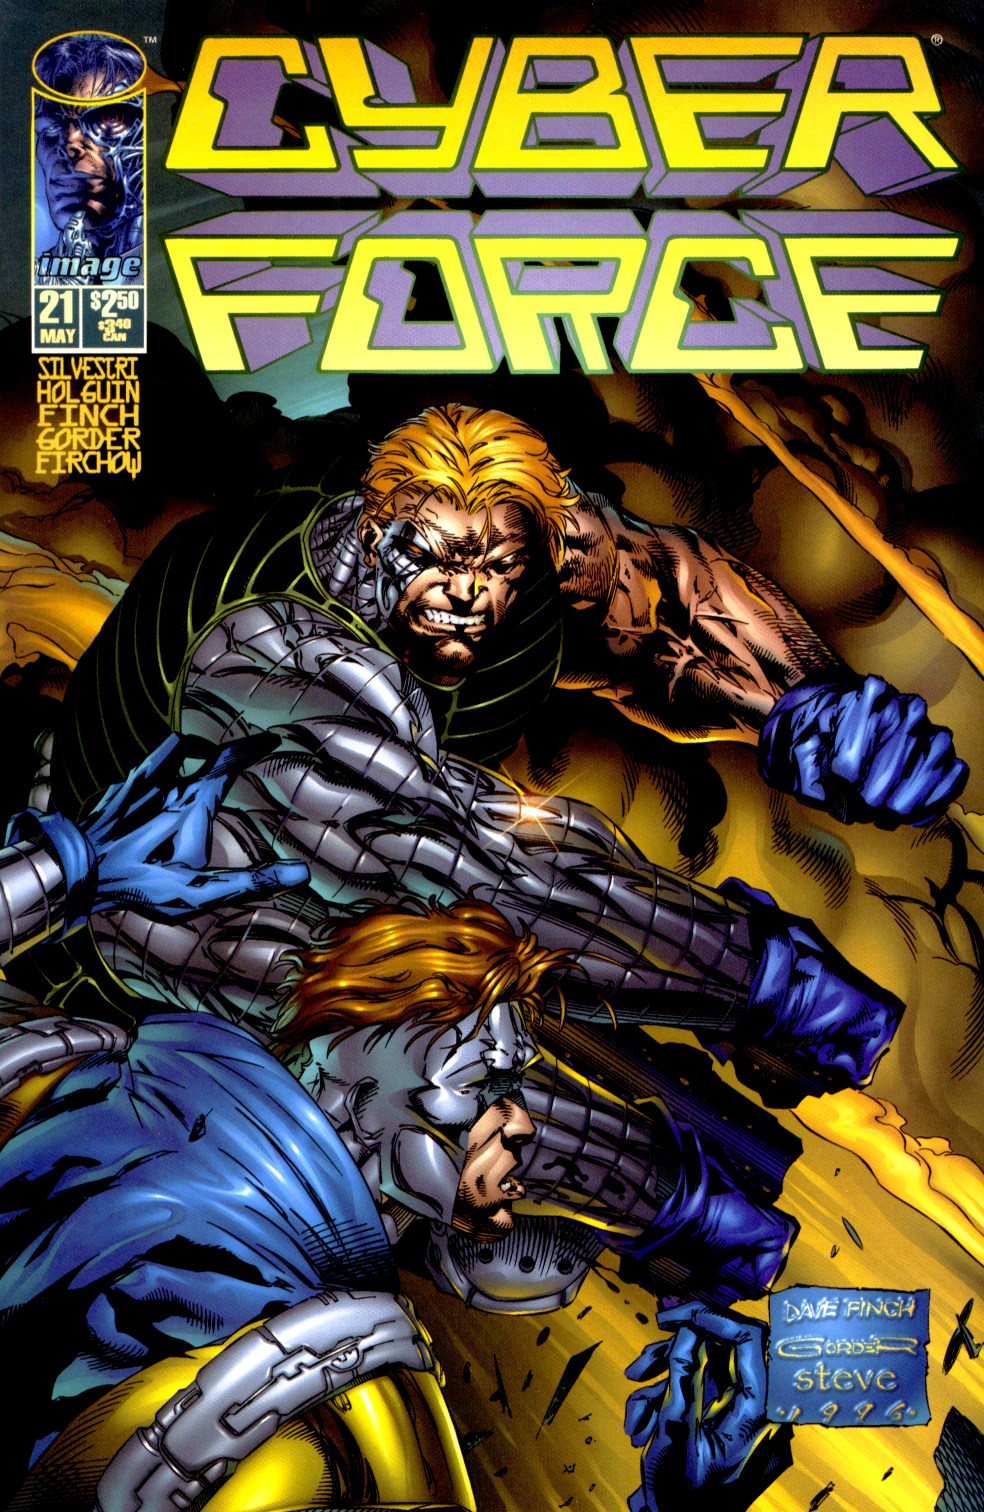 Cyberforce (1993) Issue #21 #21 - English 1